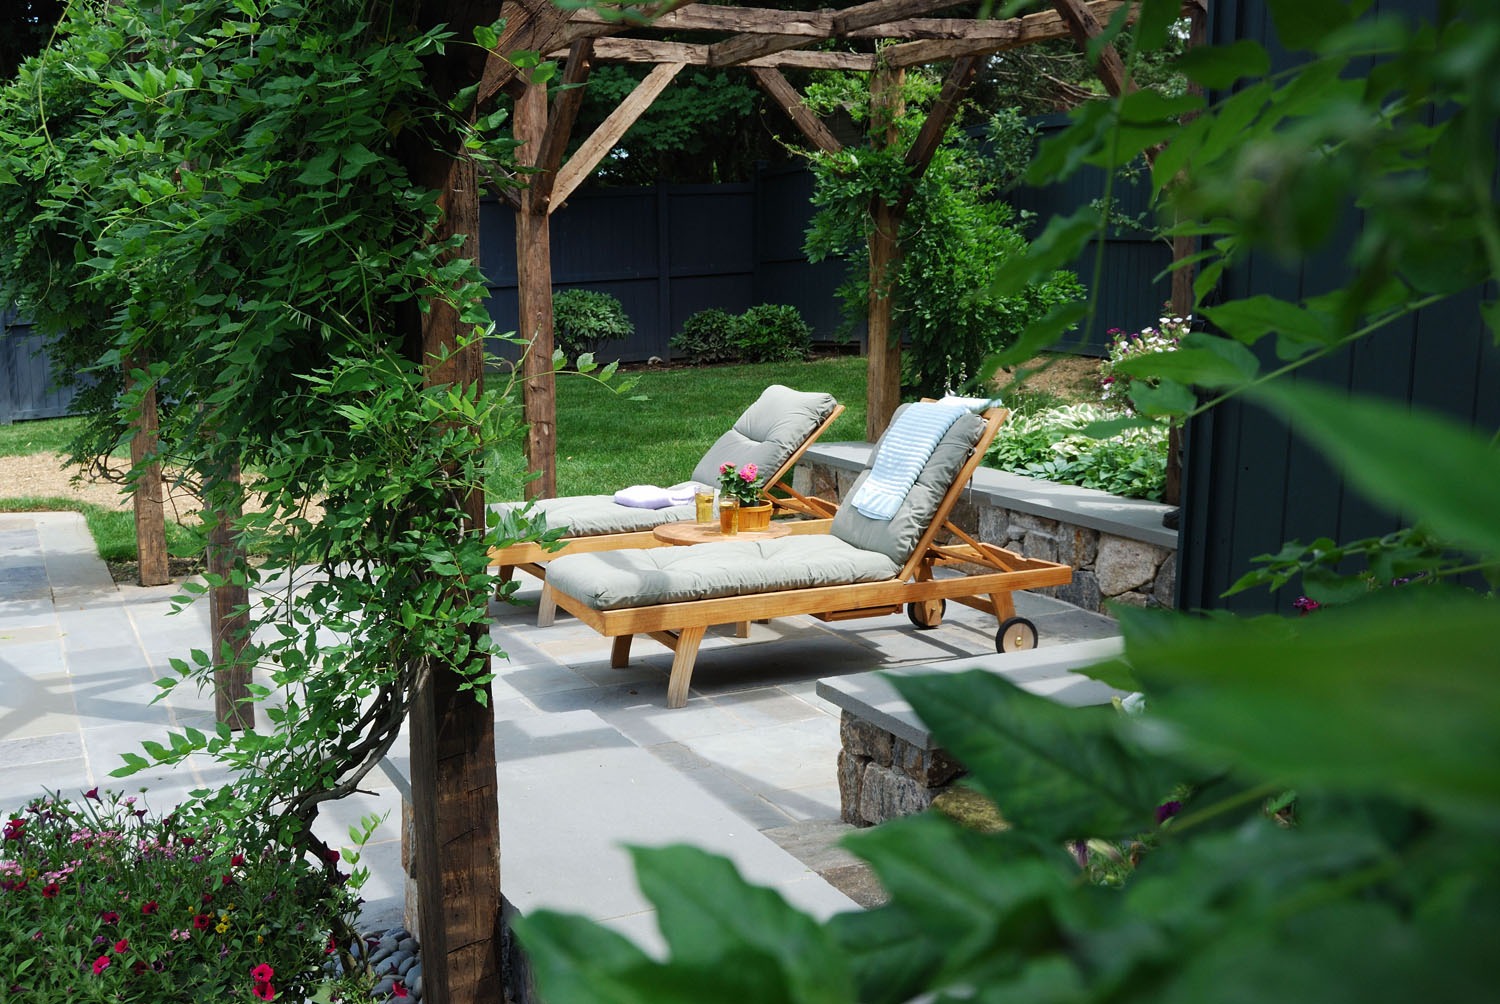 A serene garden with a wooden pergola, two reclining chairs with cushions, and a table with drinks surrounded by vibrant greenery and flowers.